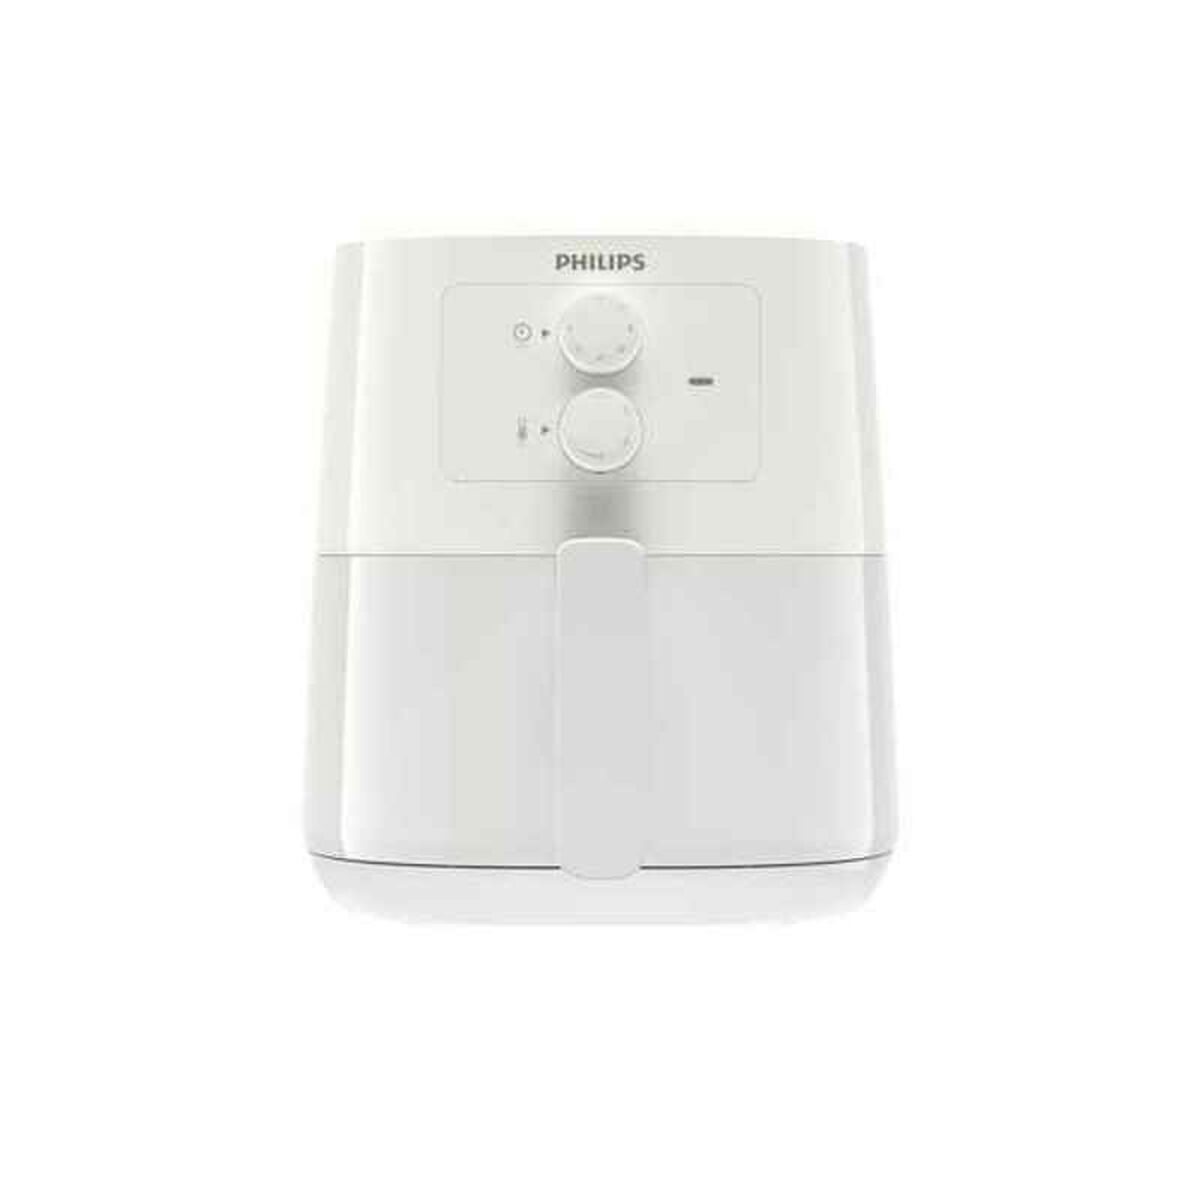 Luchtfriteuse Philips HD9200/10 1400 W Wit/Grijs